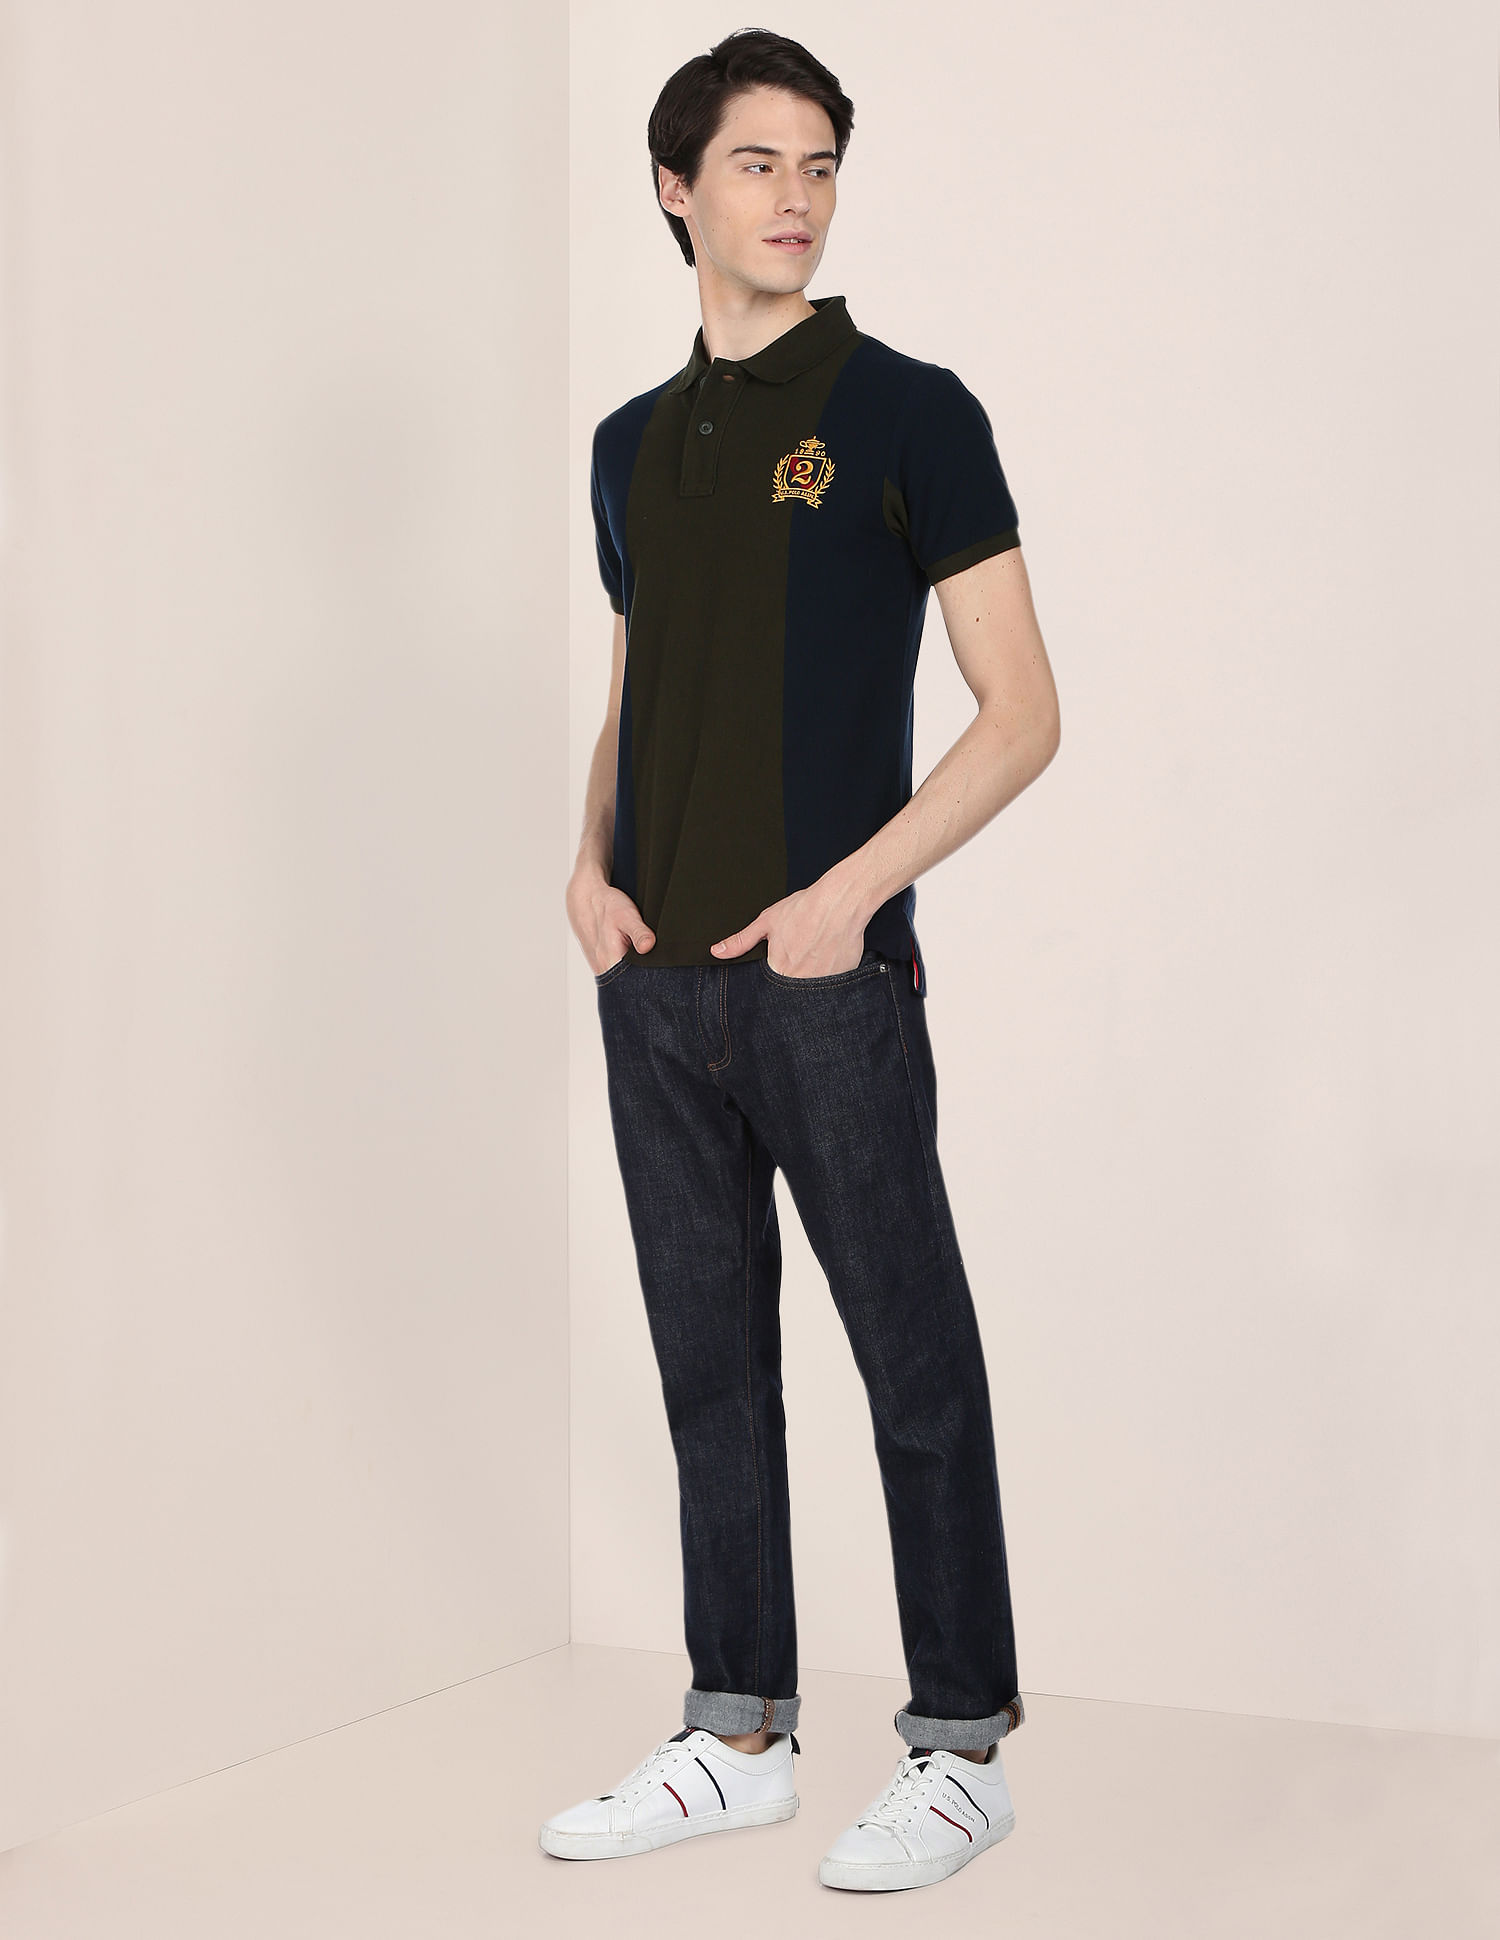 Topman monogram polo with contrast collar in navy - part of a set